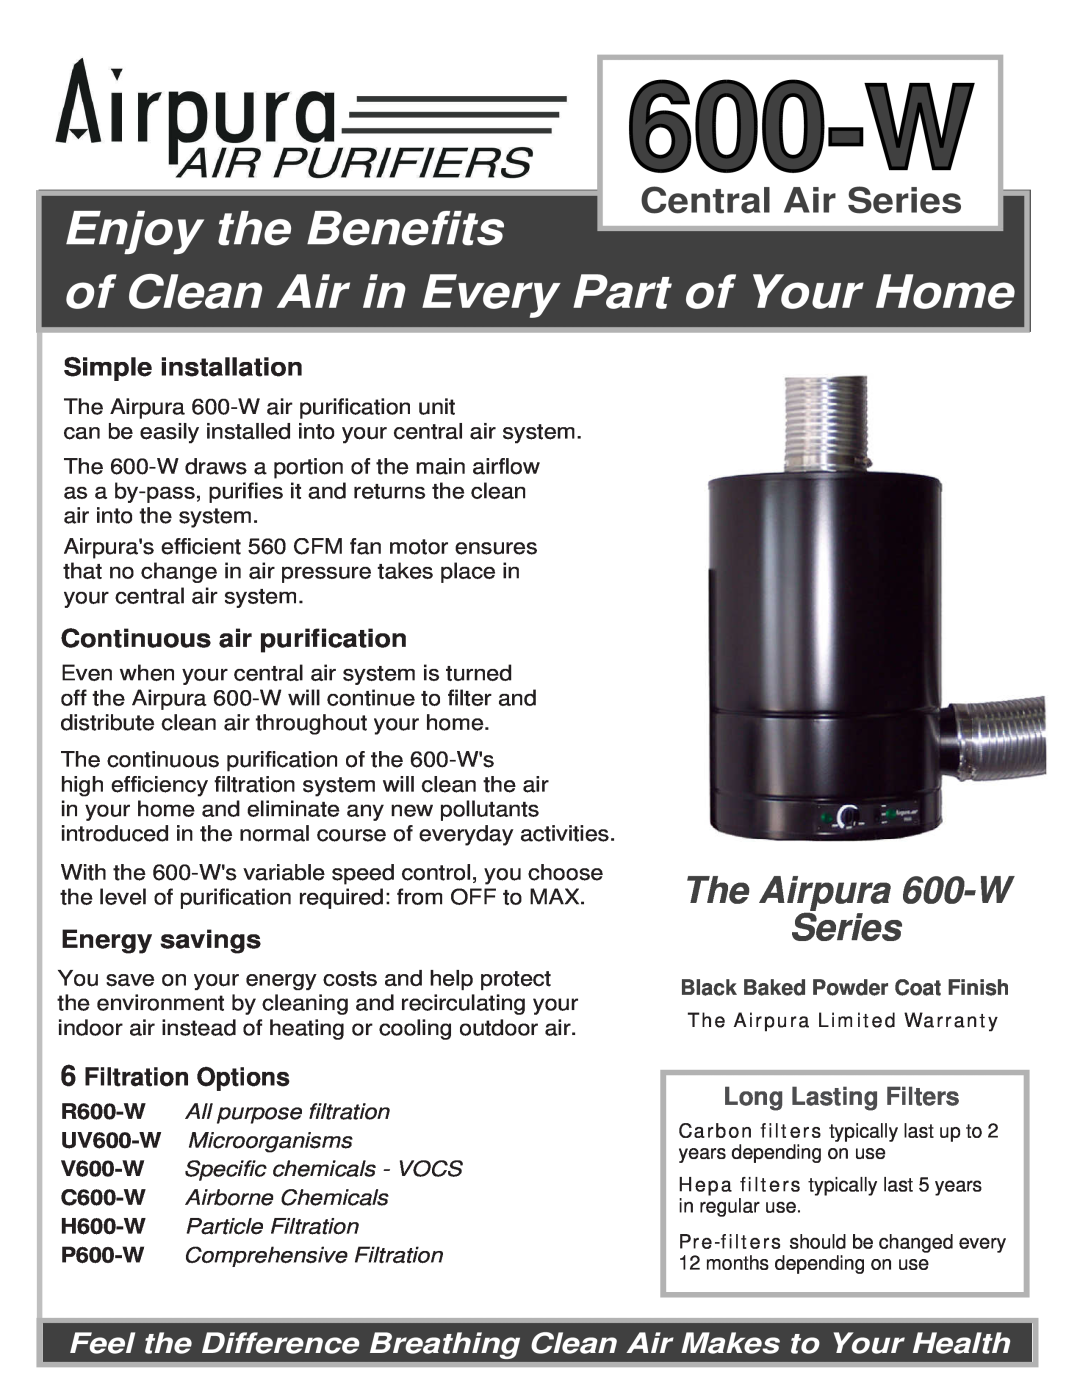 Airpura Industries 600-W warranty Simple installation, Continuous air purification, Energy savings, Filtration Options 